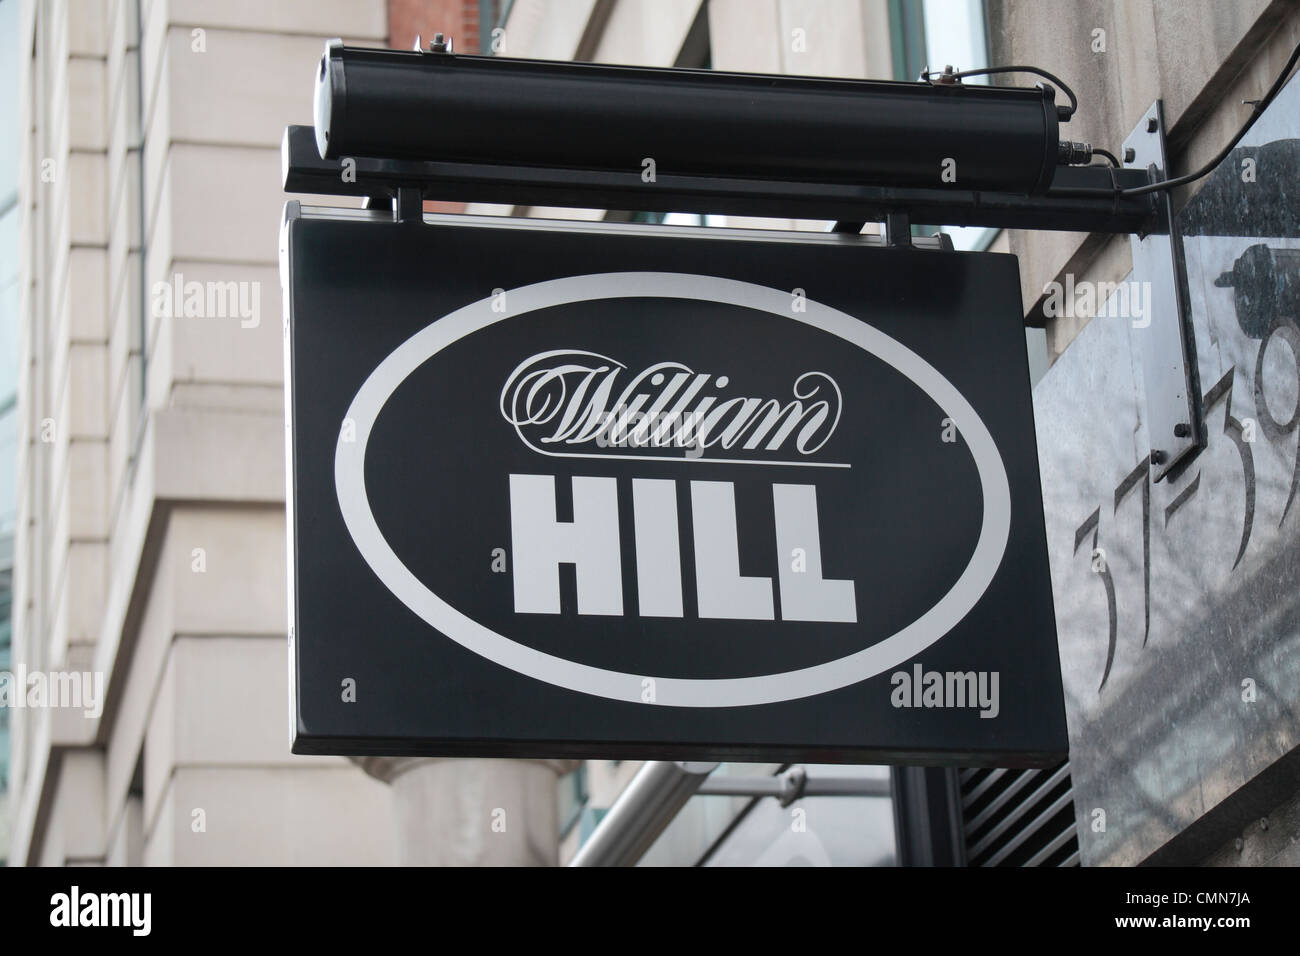 The William Hill logo above a shop in Victoria, Westminster, London, UK. Stock Photo